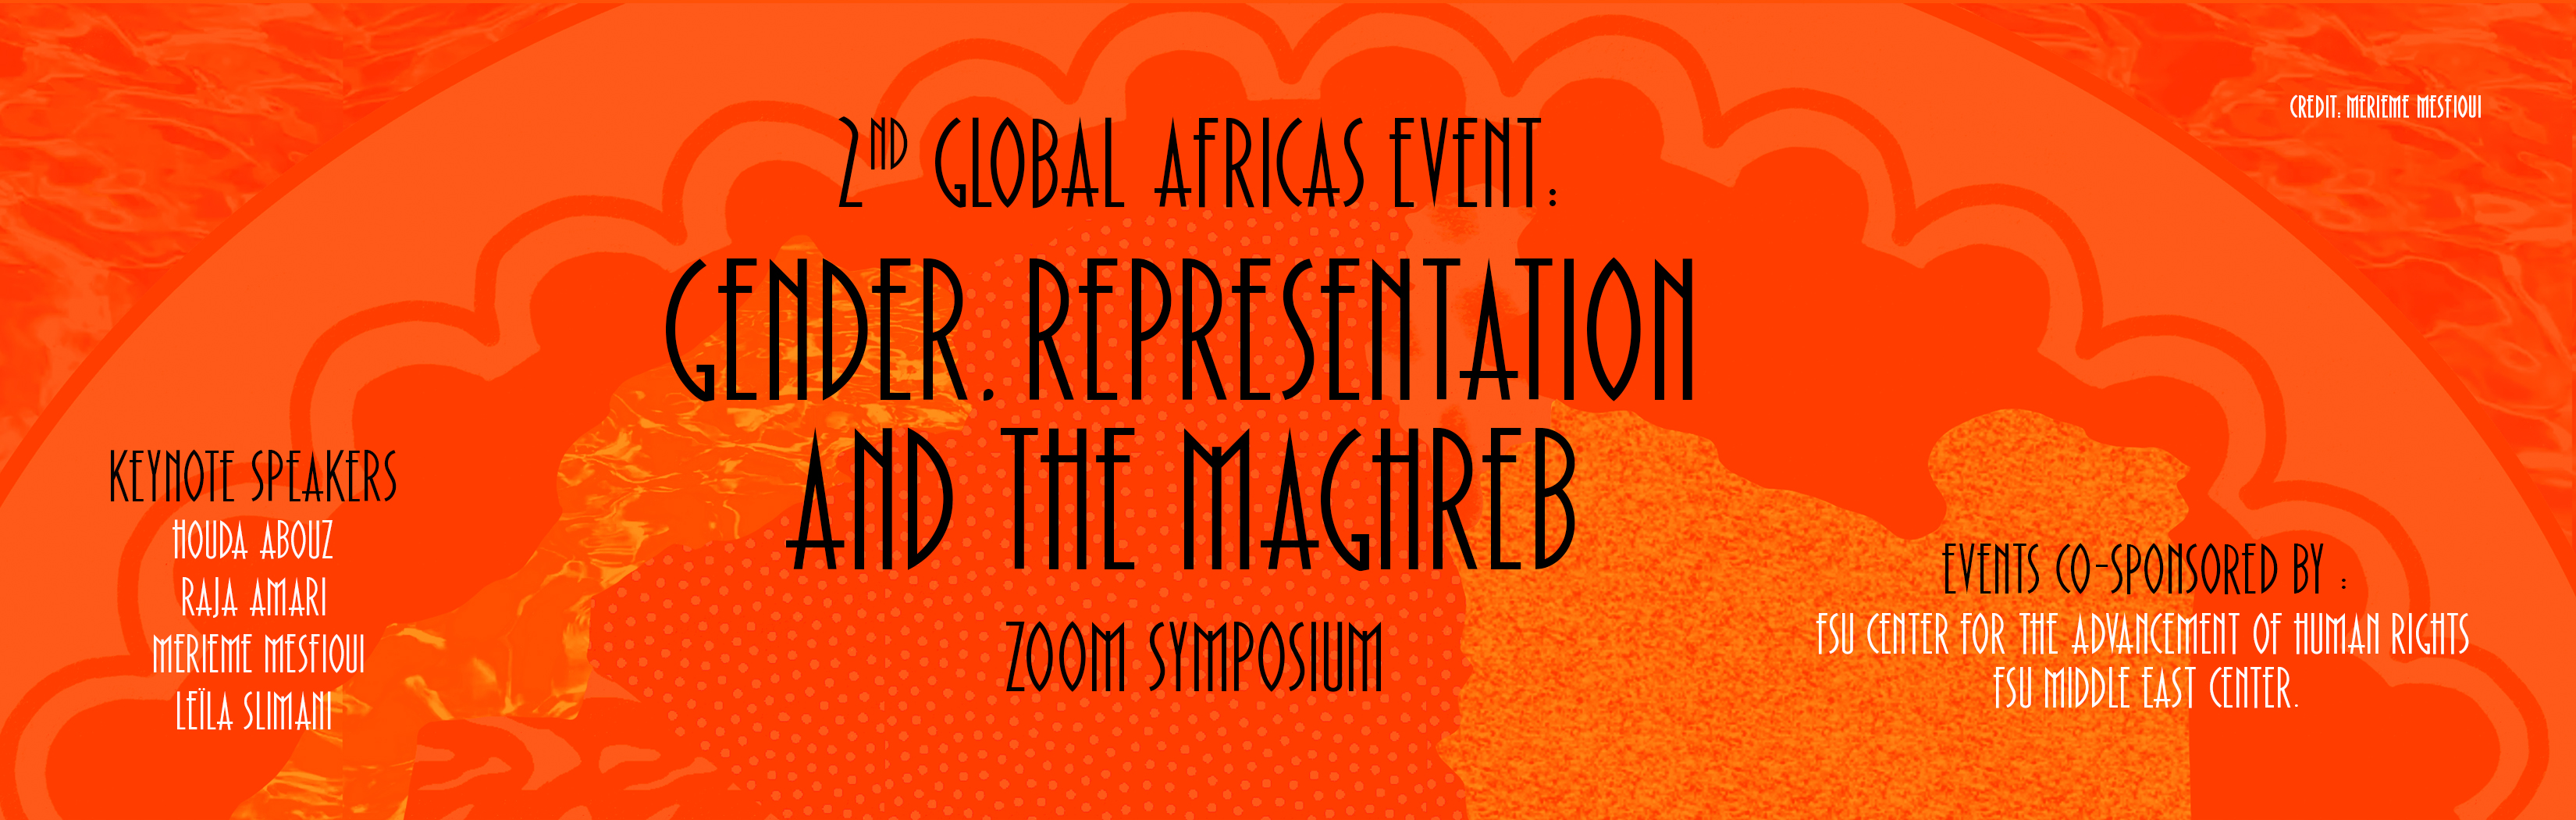 Global Africas: Gender, Representation, and the Maghreb